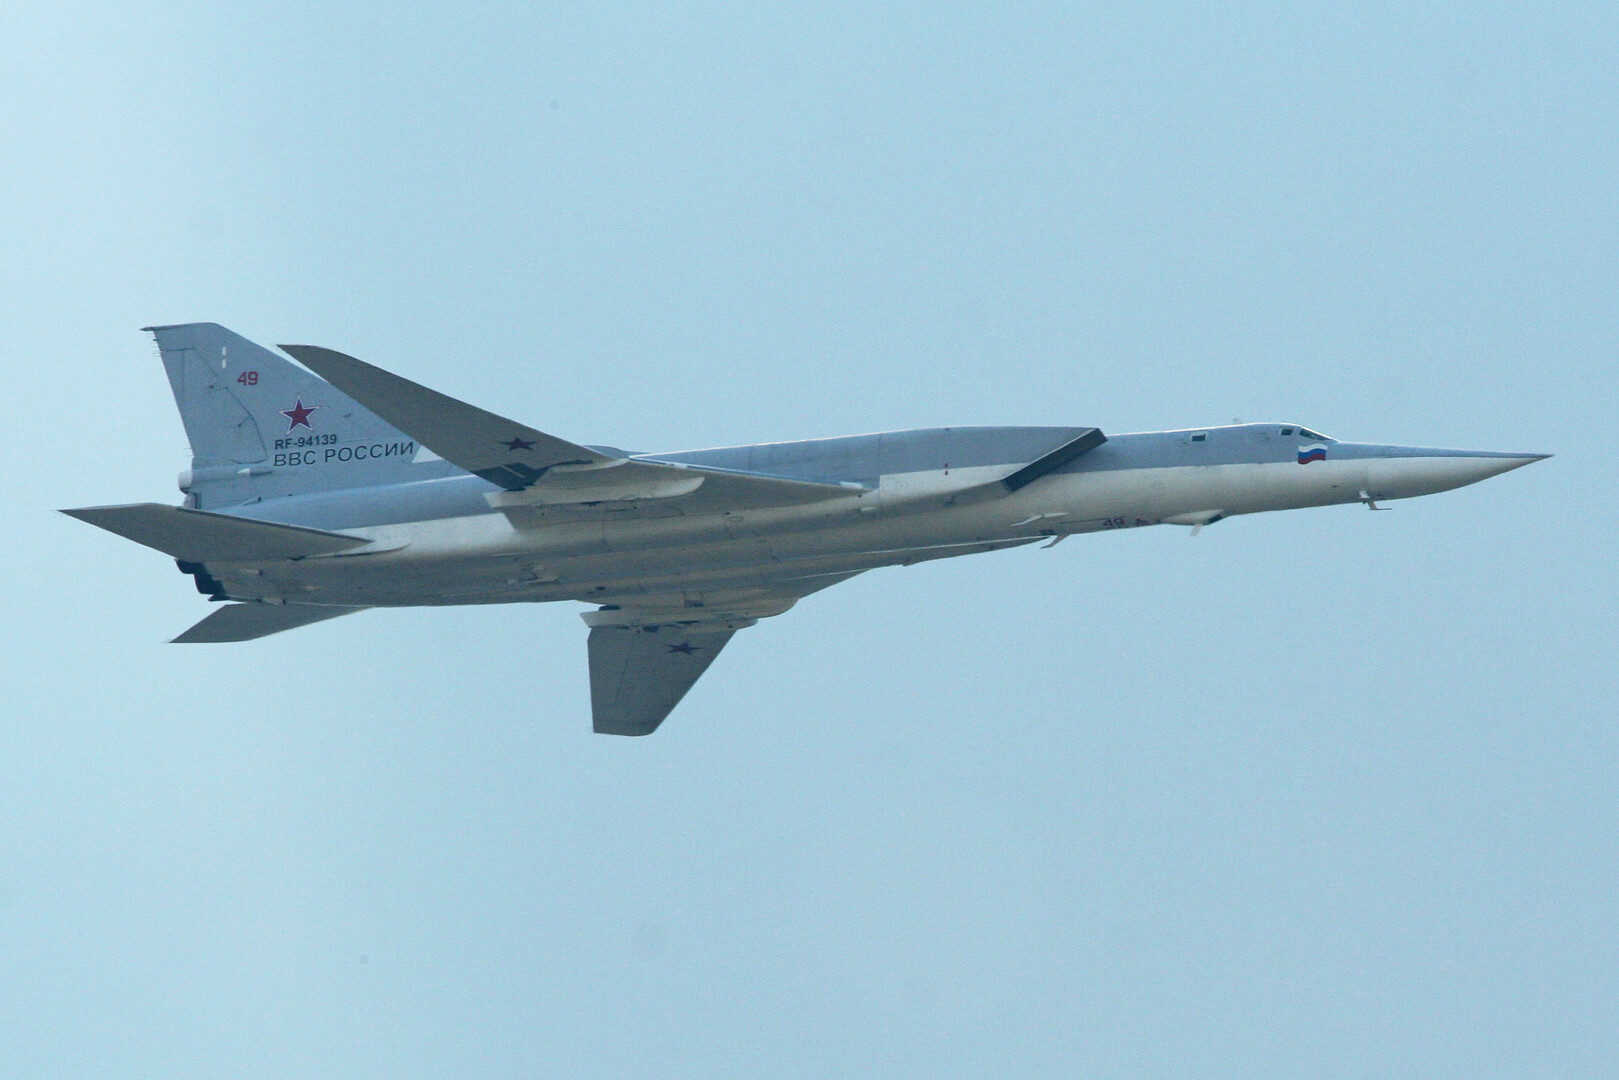 //Tu-22M3 / Archivild zur Illustration / Tupolev Tu-22M3 Backfire-C 'RF-94139 / 49 red' by Support your local Air Museum! (HawkeyeUK) is licensed under CC BY-SA 2.0. https://creativecommons.org/licenses/by-sa/2.0/